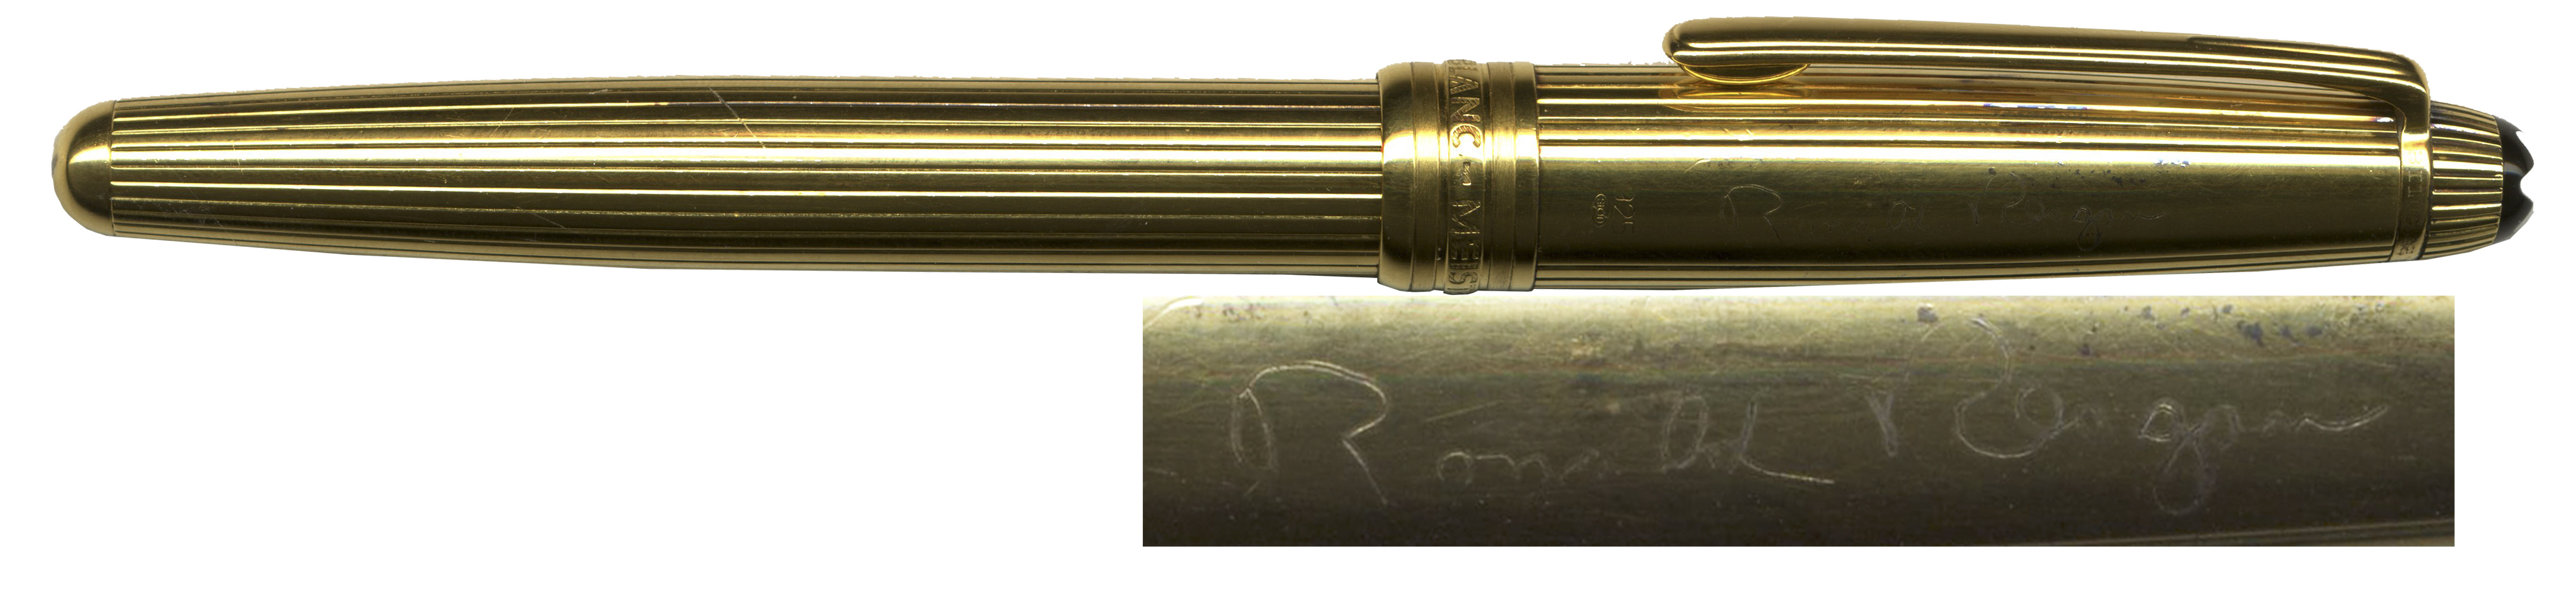 White House Pen Regan pen Ronald Reagan Mont Blanc Meisterstuck Engraved Pen -- Personally Owned & Used by Ronald Reagan, The Great Communicator